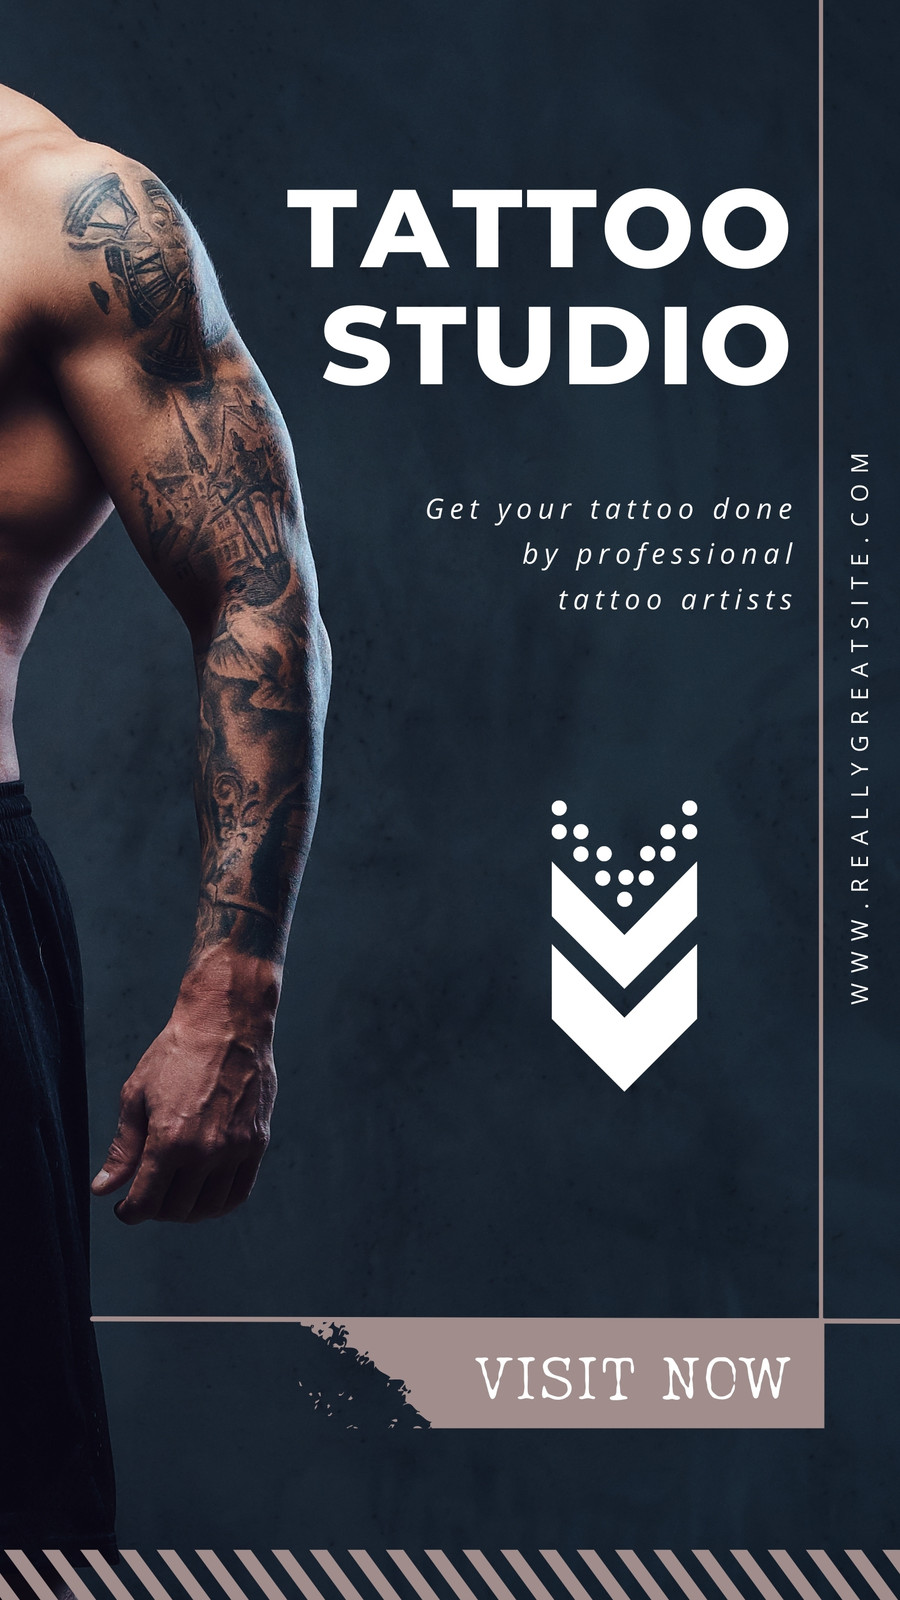 Tattoo Studio Services Offer With Pinup Girl Online Poster Template -  VistaCreate